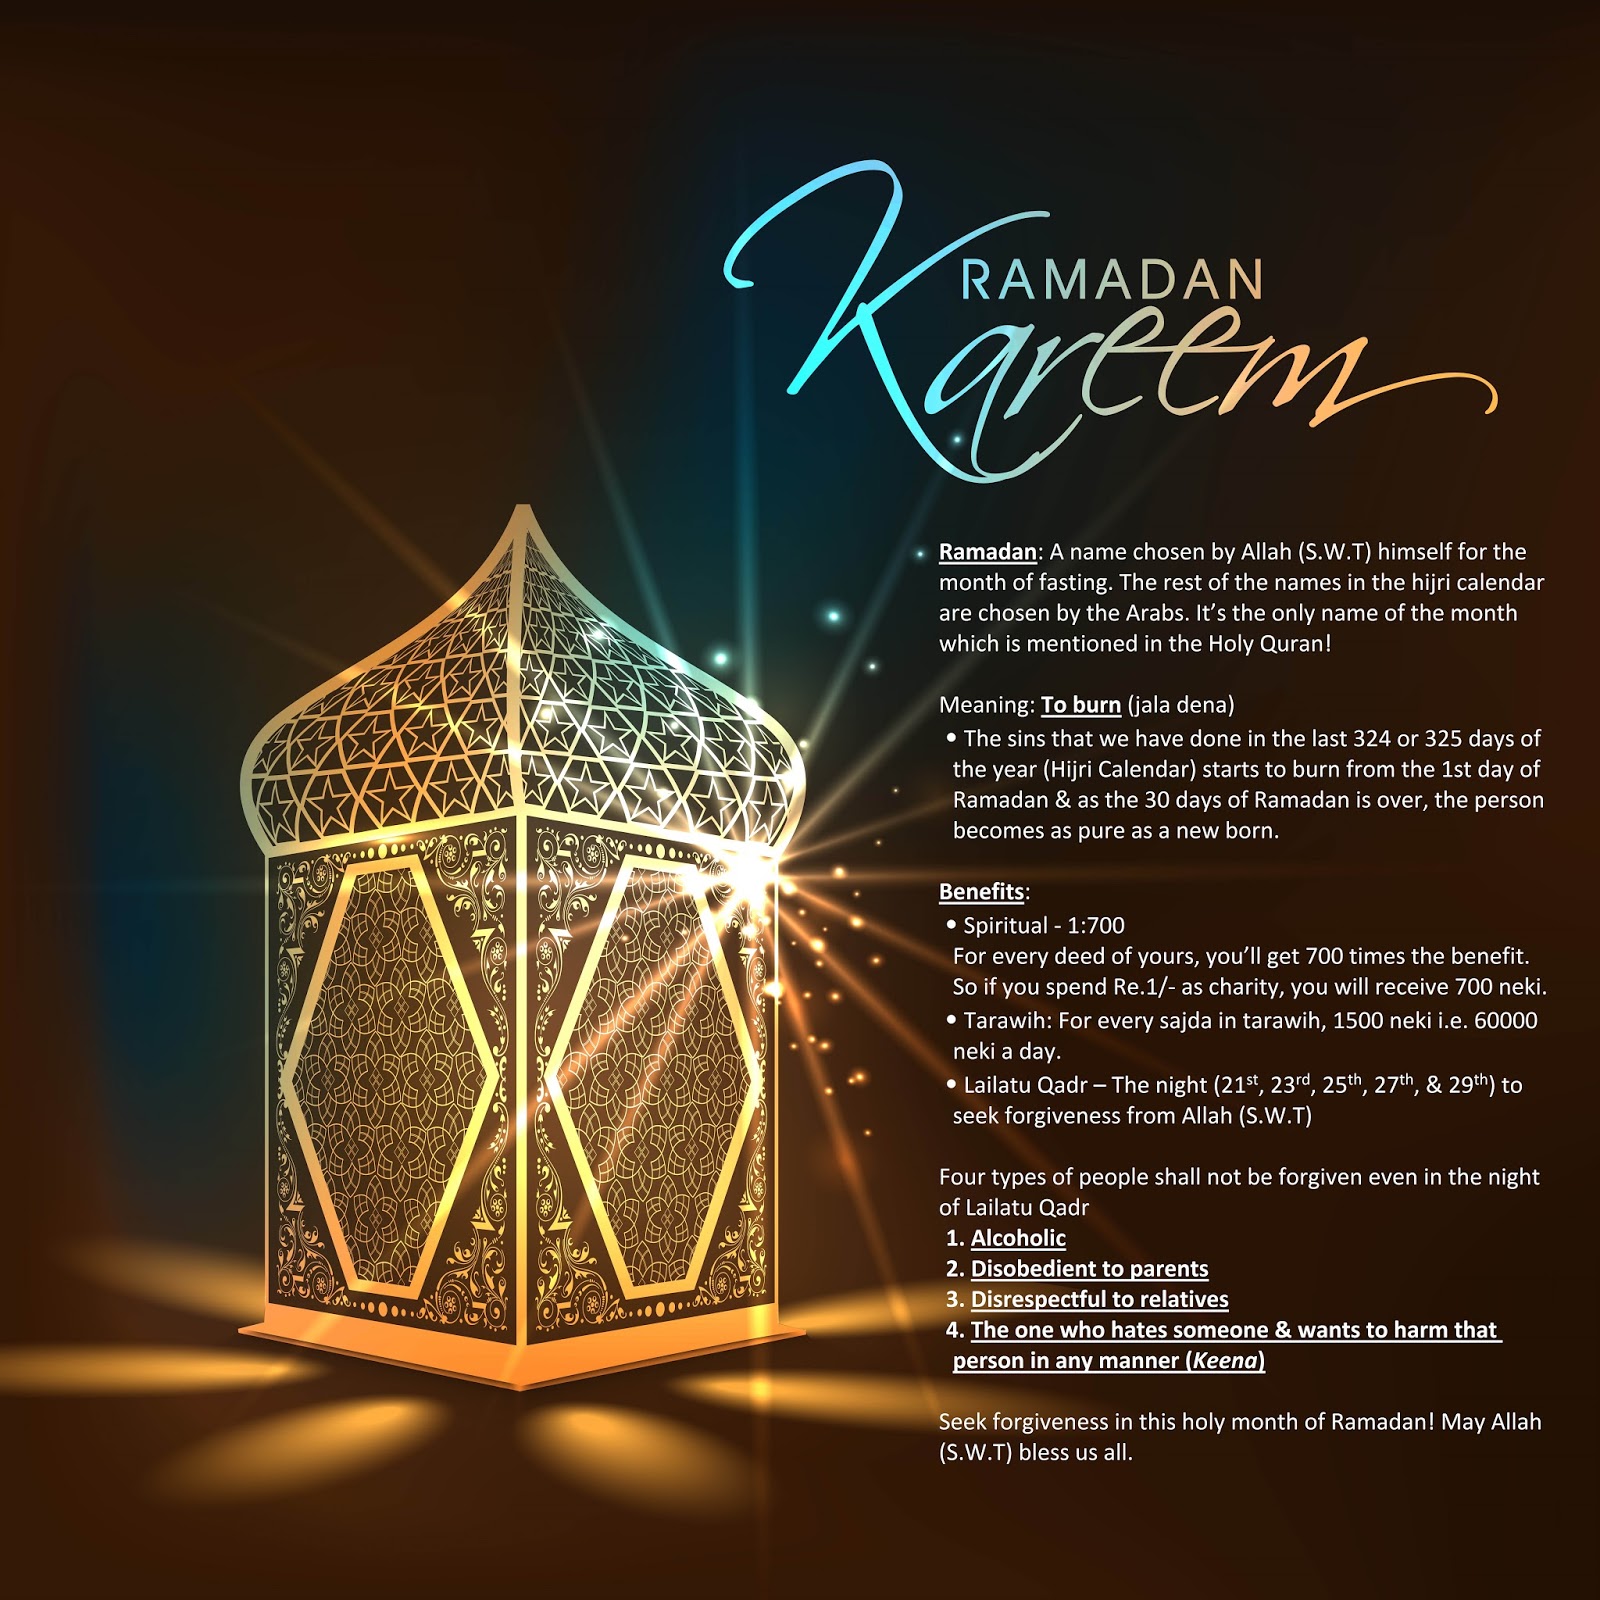 Meaning and Benefits of Ramadan!